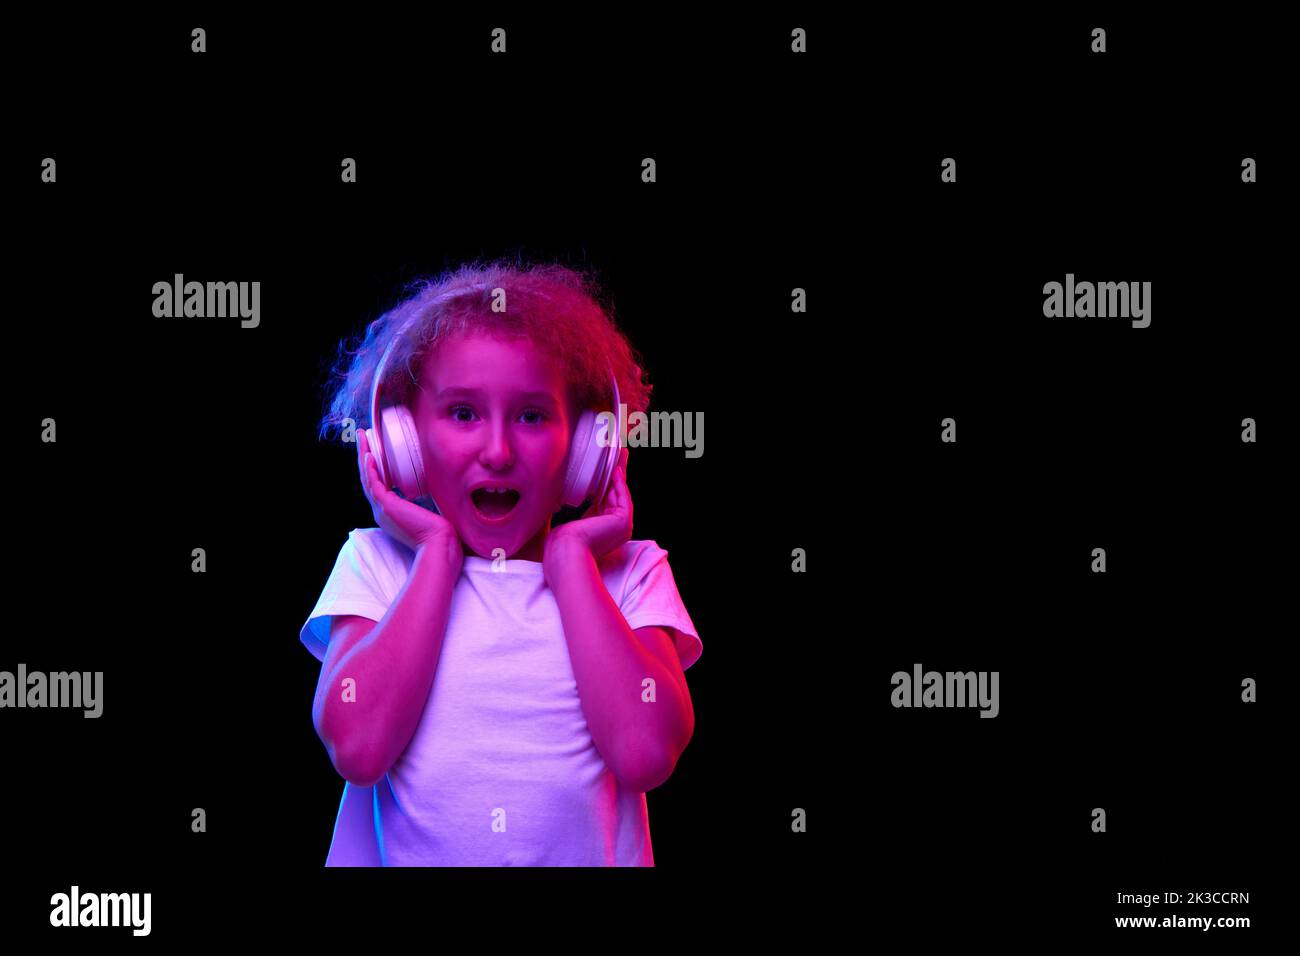 Little Shocked Girl 6 7 Years Old Wearing White T Shirt And Headphones